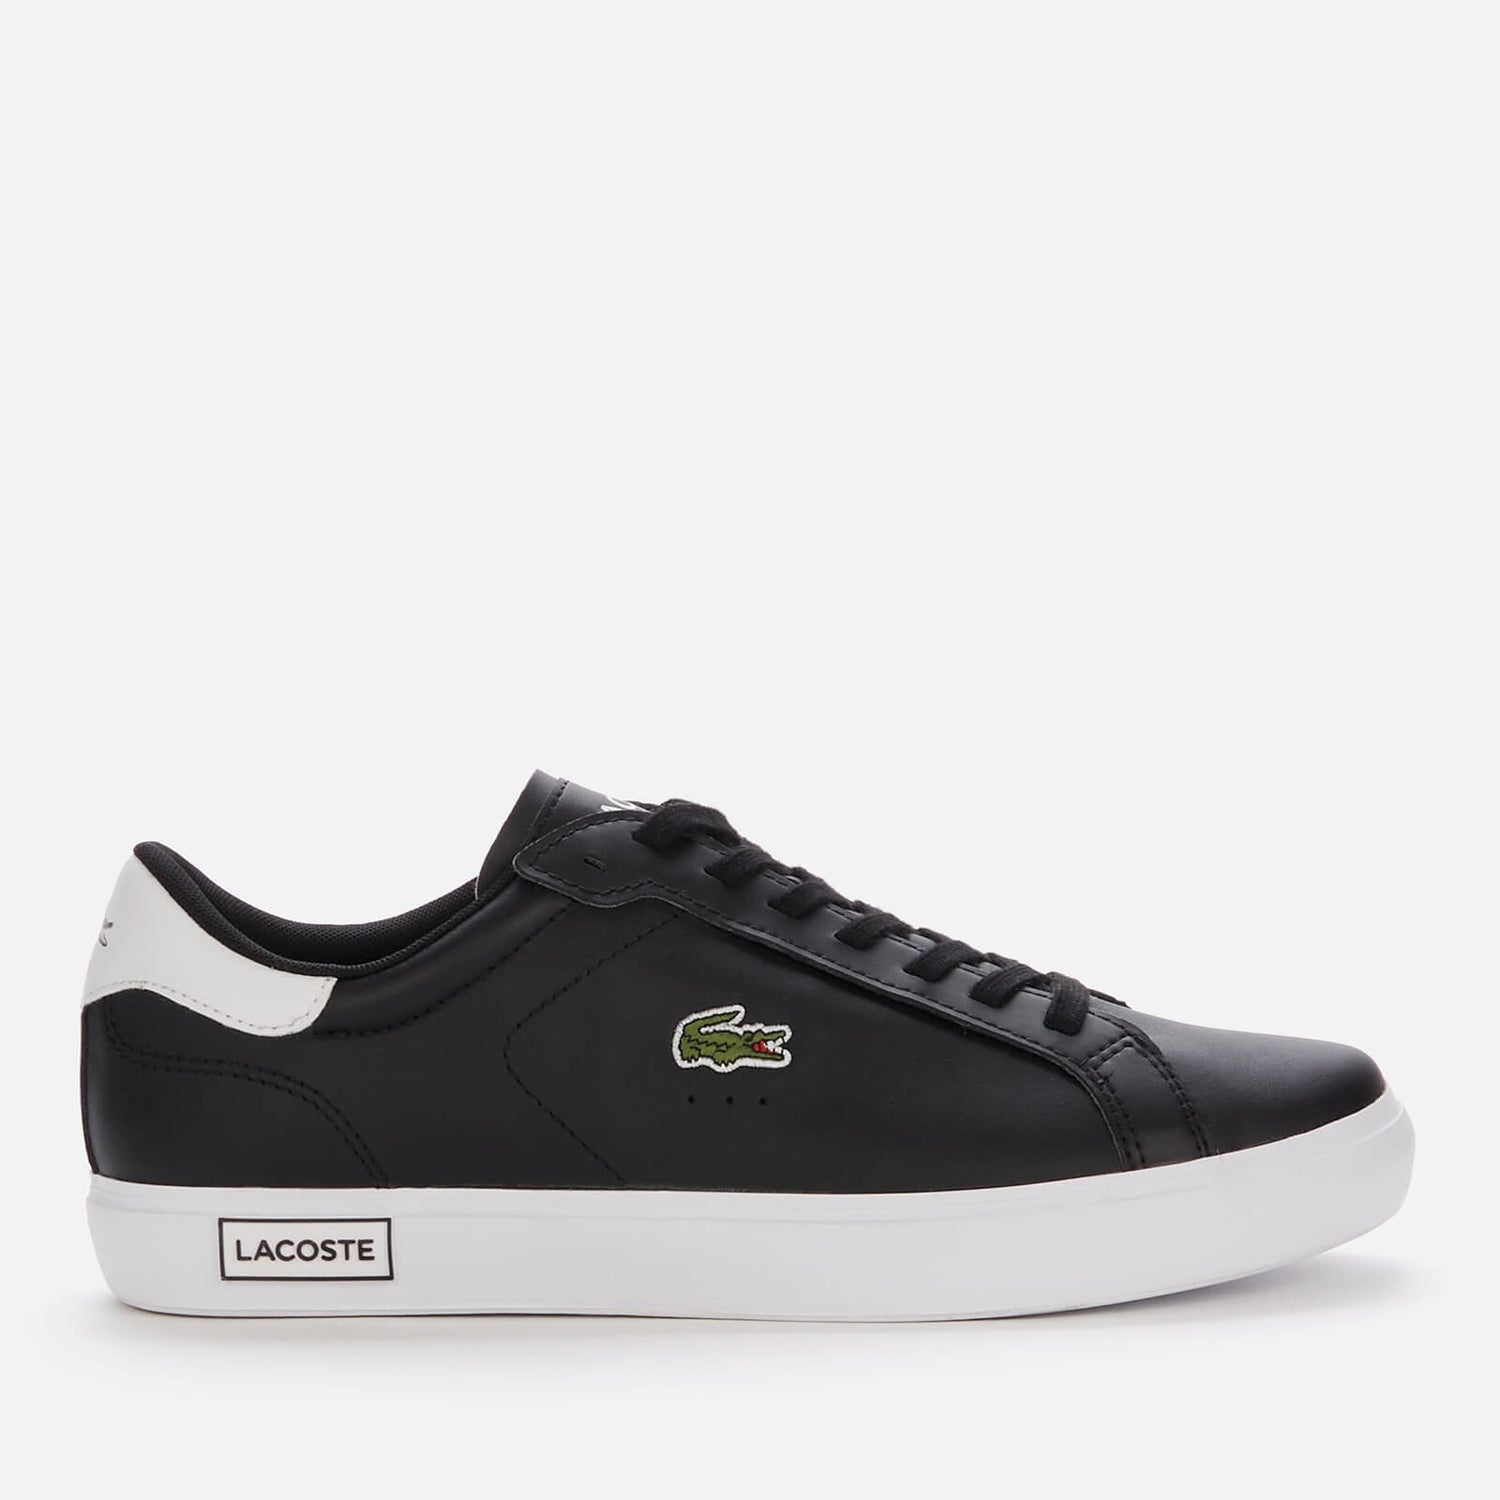 Lacoste Men's Powercourt 0520 1 Leather Court Trainers - Black/White